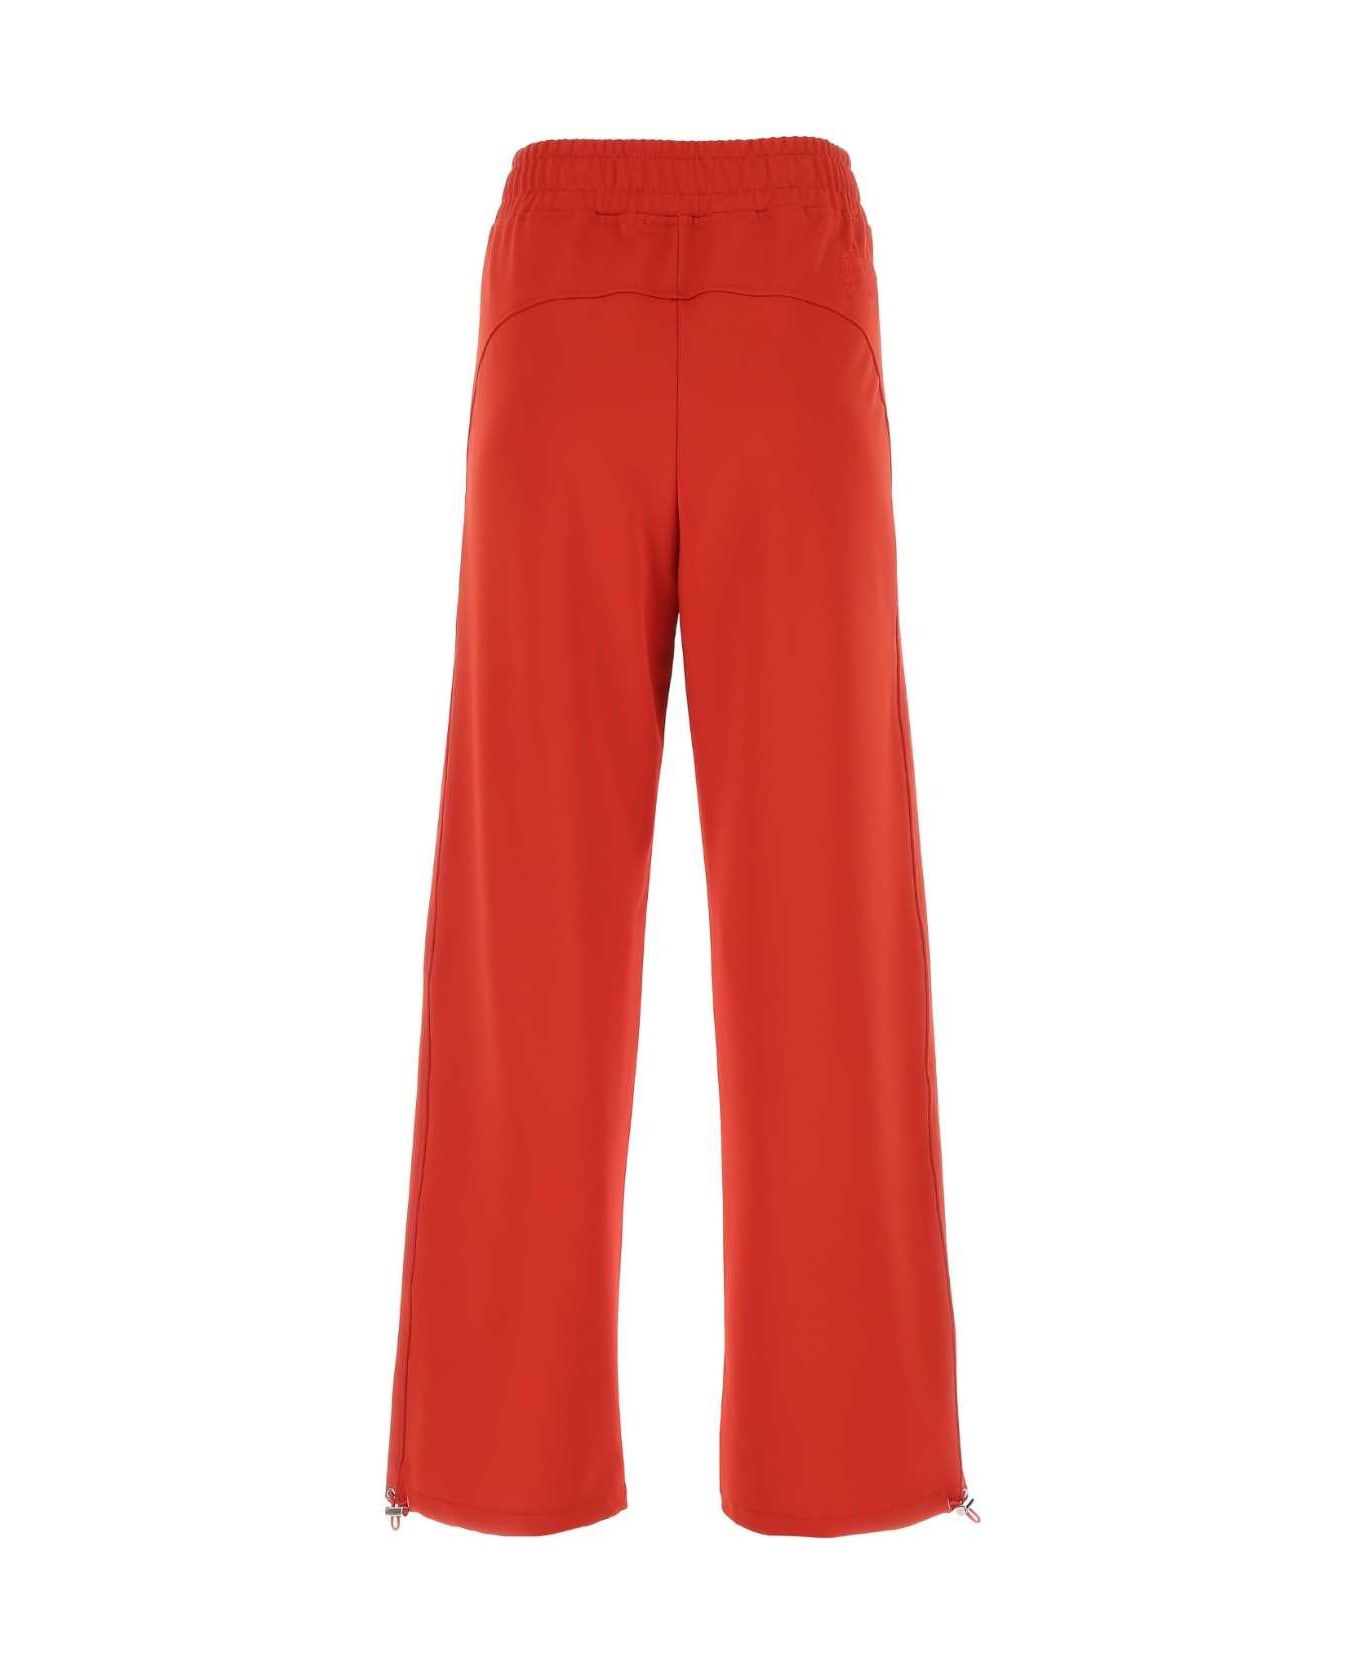 J.W. Anderson Red Stretch Polyester Pant - 450